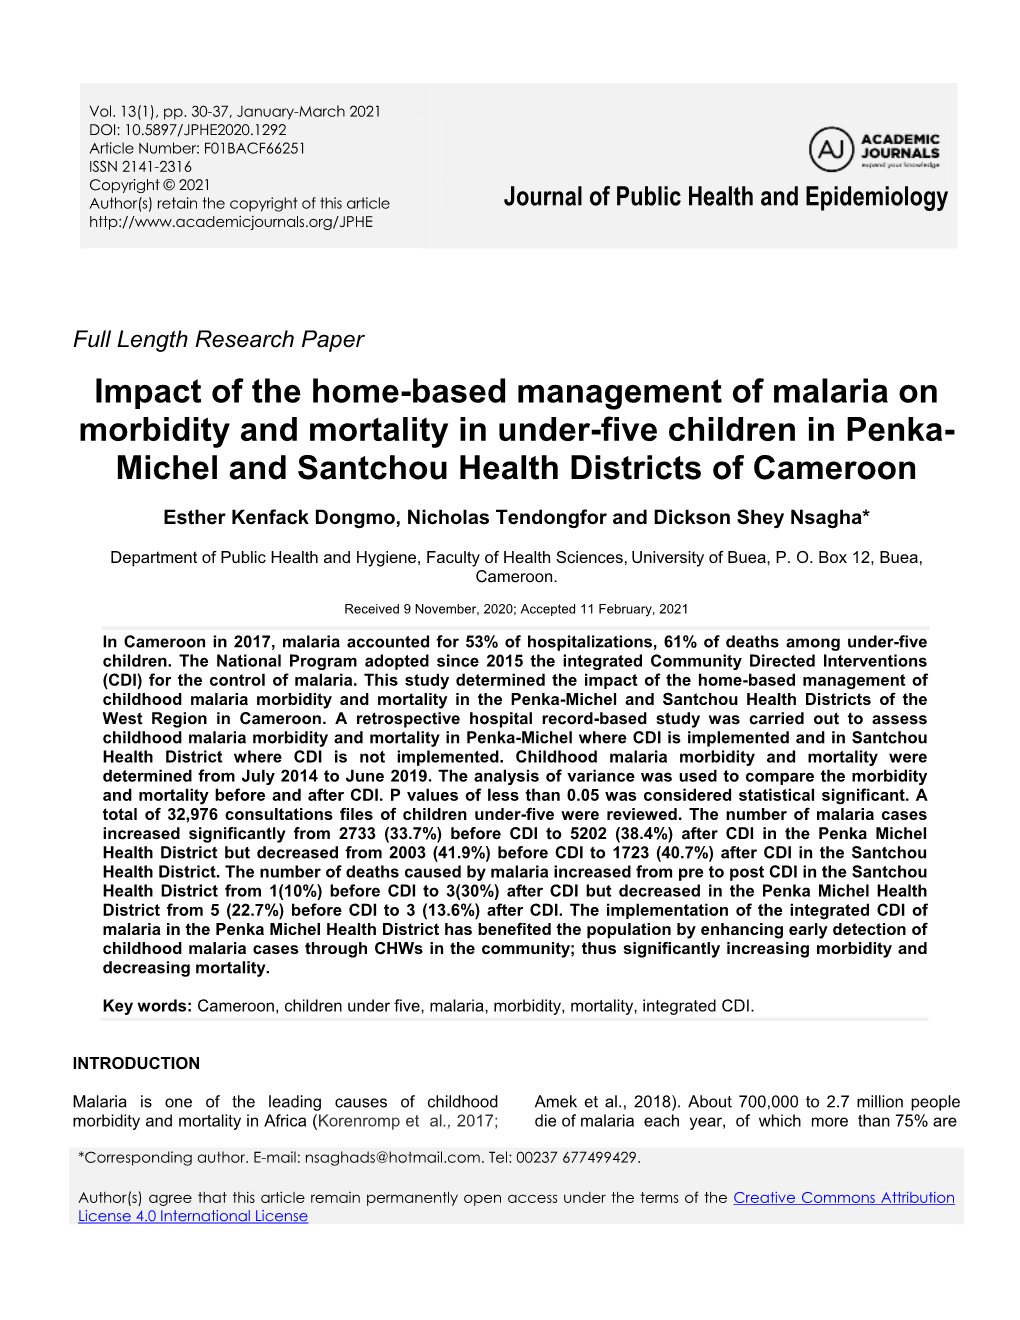 Impact of the Home-Based Management of Malaria on Morbidity and Mortality in Under-Five Children in Penka- Michel and Santchou Health Districts of Cameroon